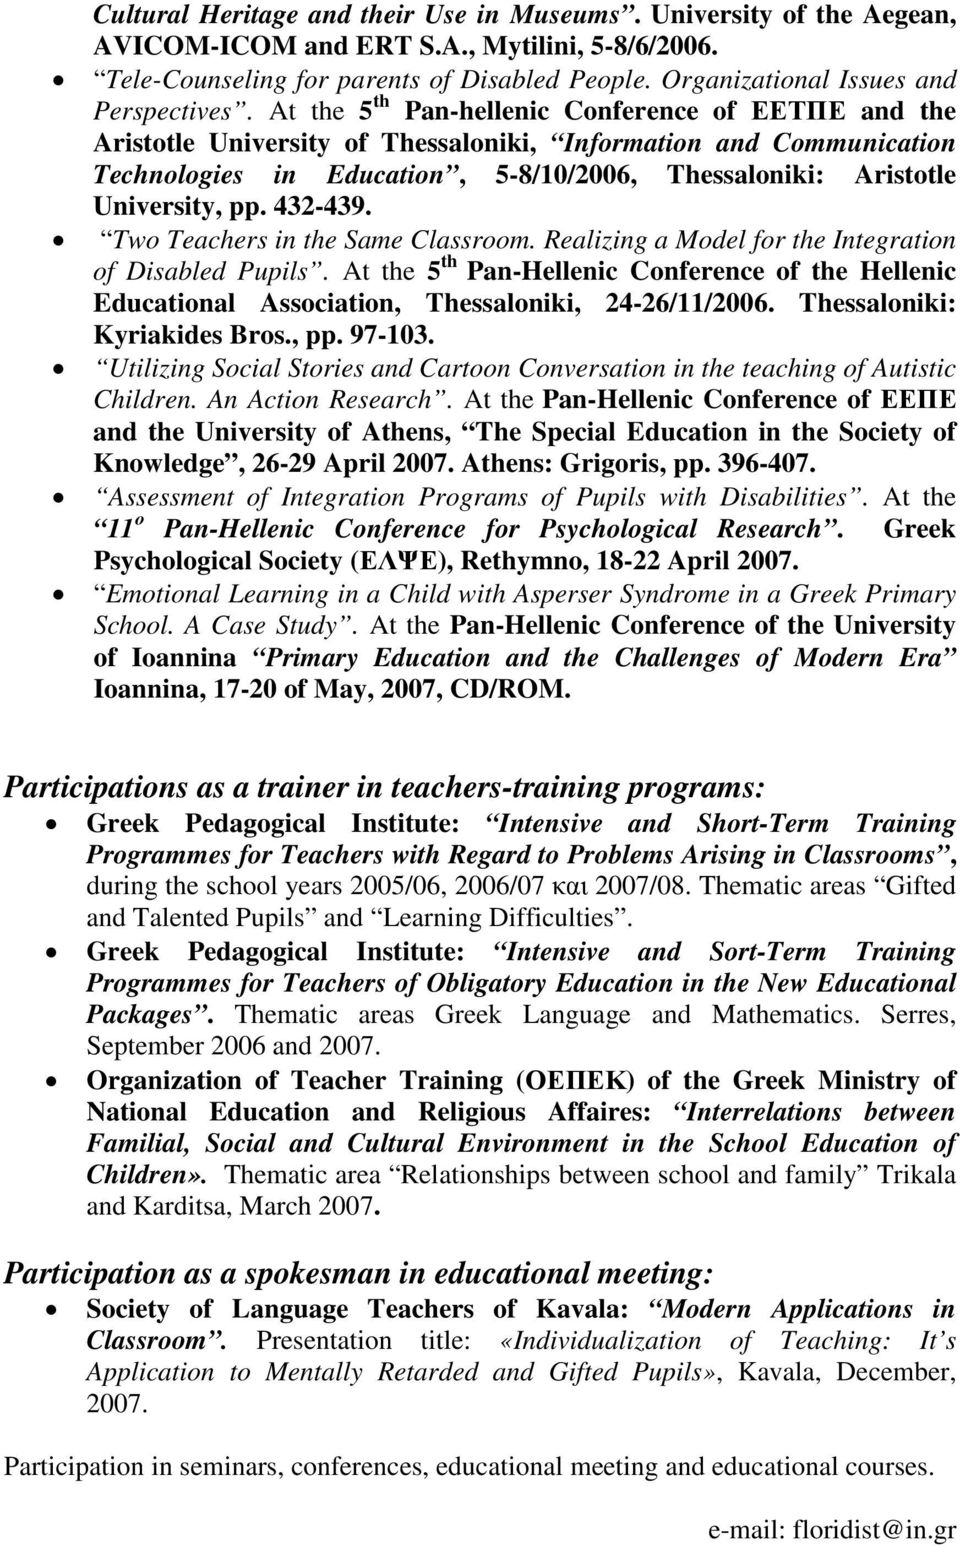 At the 5 th Pan-hellenic Conference of ΕΕΤΠΕ and the Aristotle University of Thessaloniki, Information and Communication Technologies in Education, 5-8/10/2006, Thessaloniki: Aristotle University, pp.